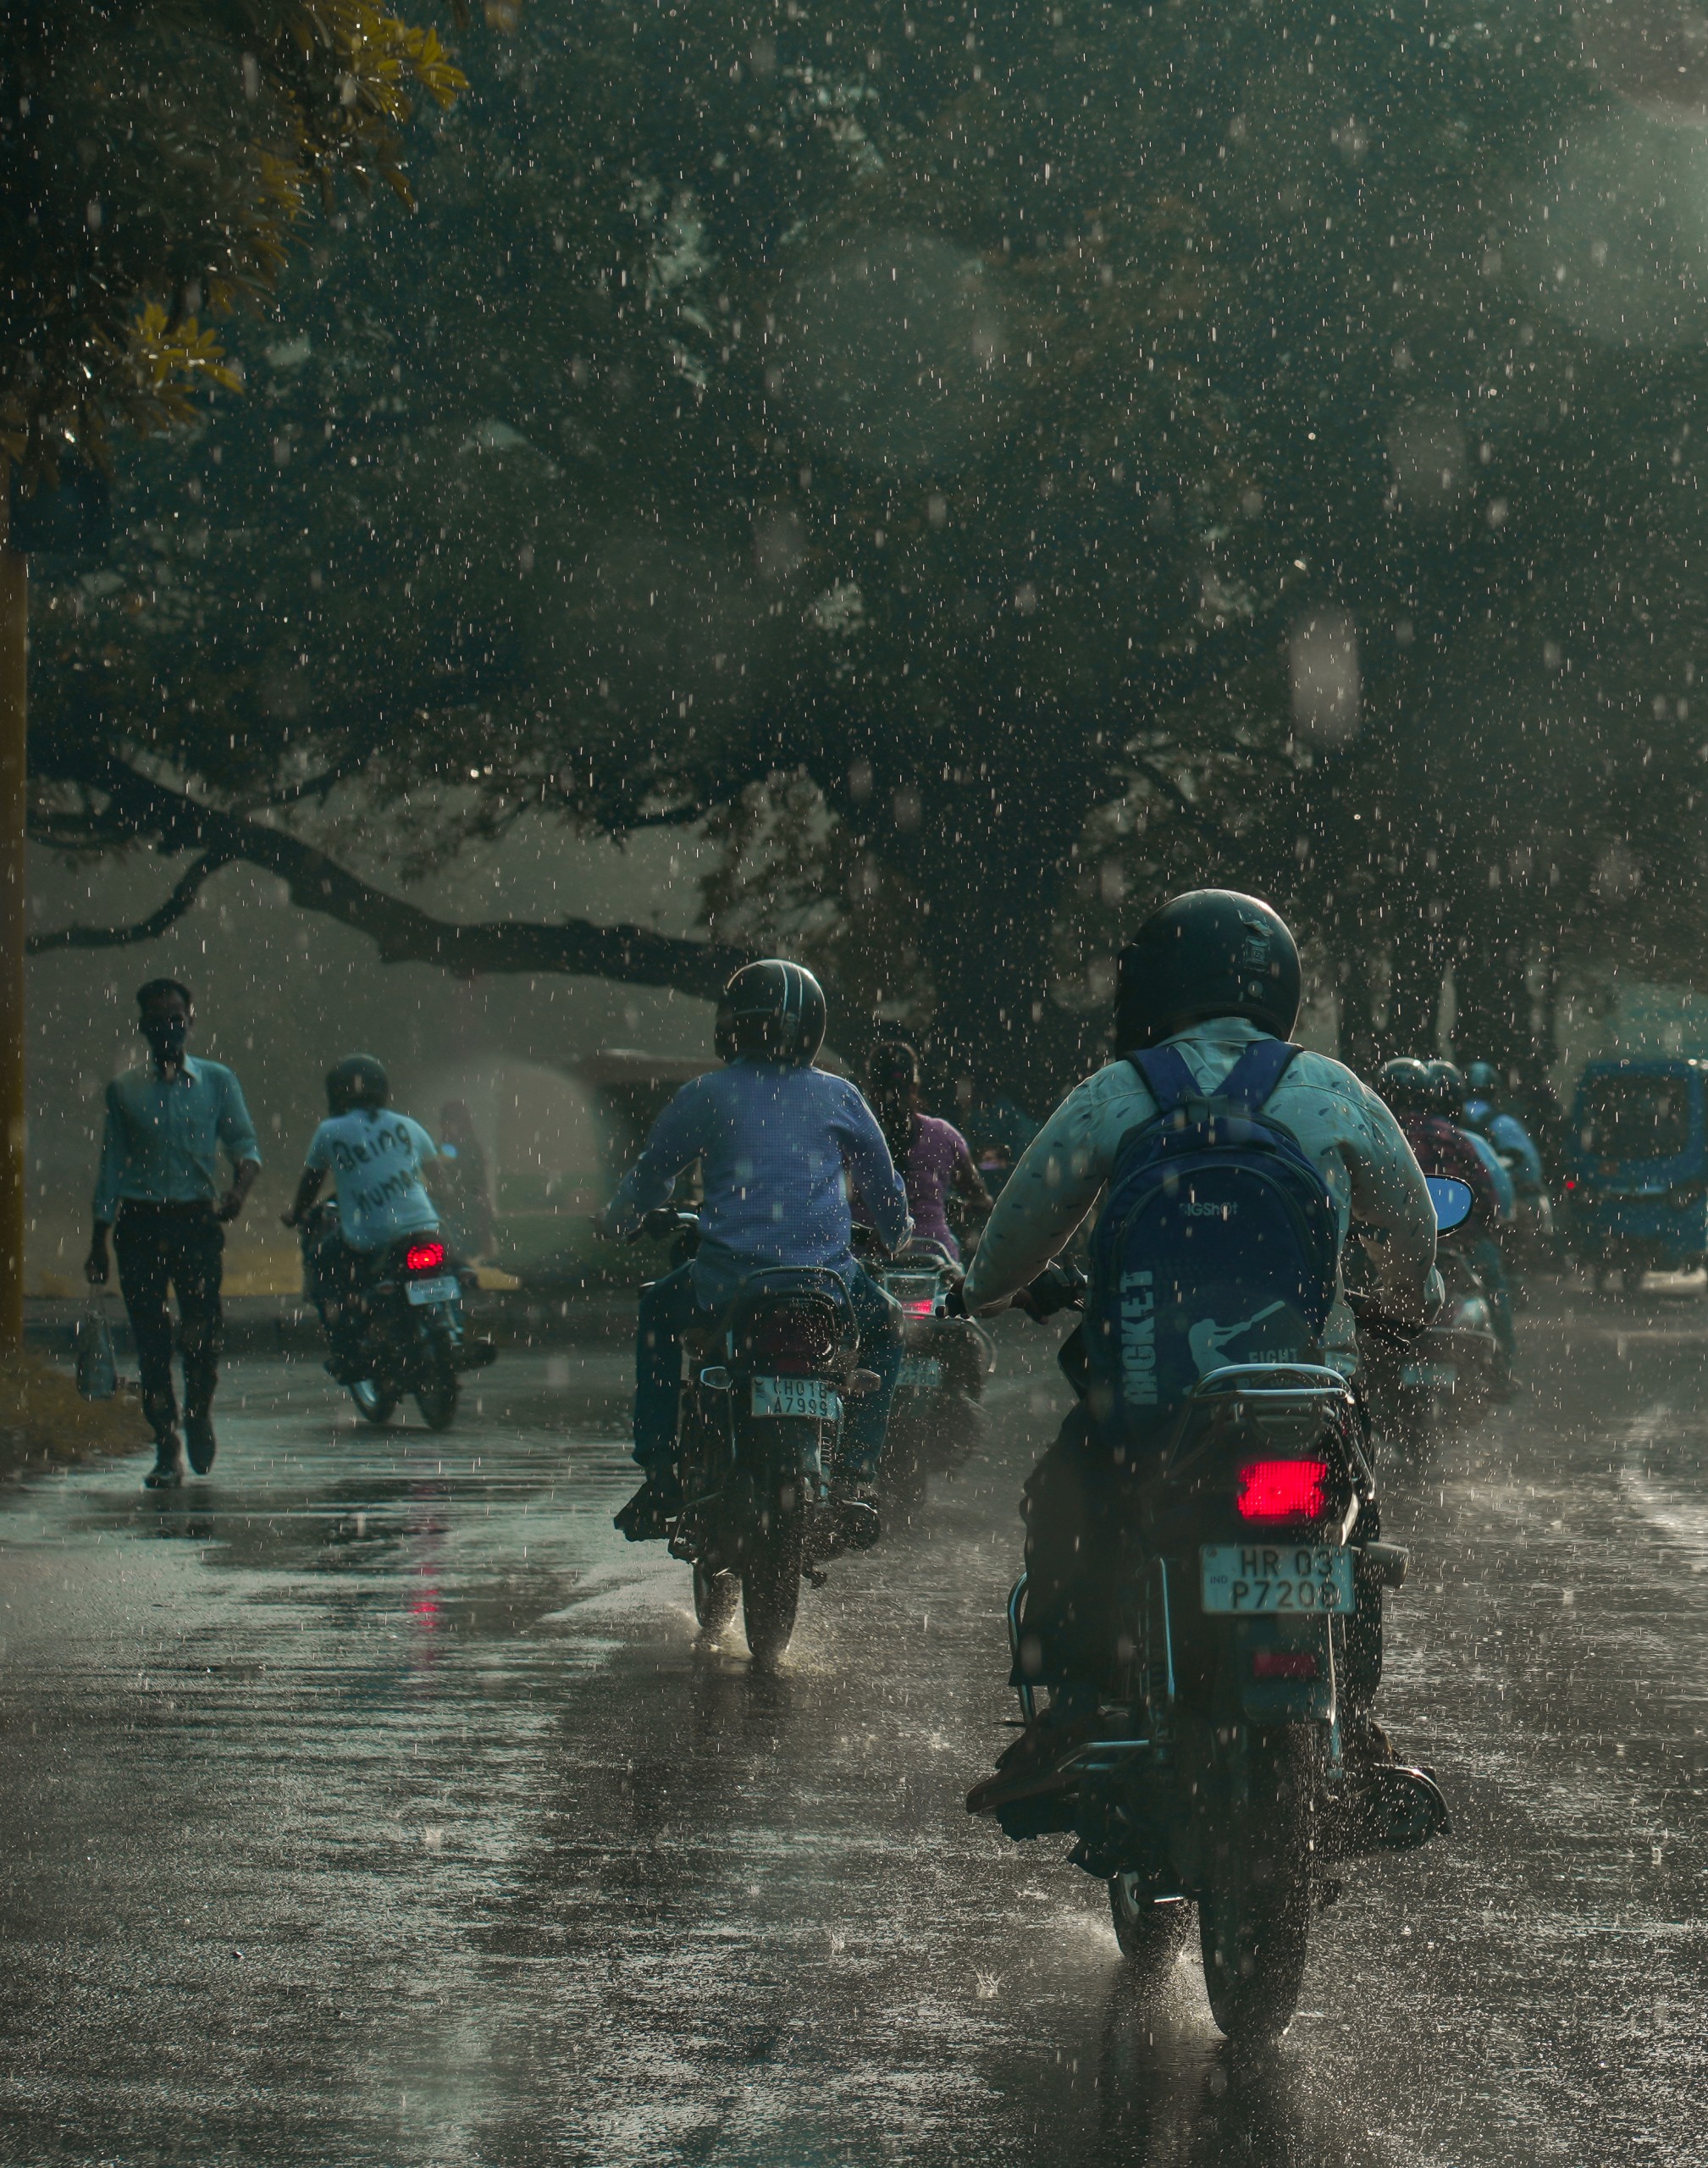 Motorcycles on road during rain